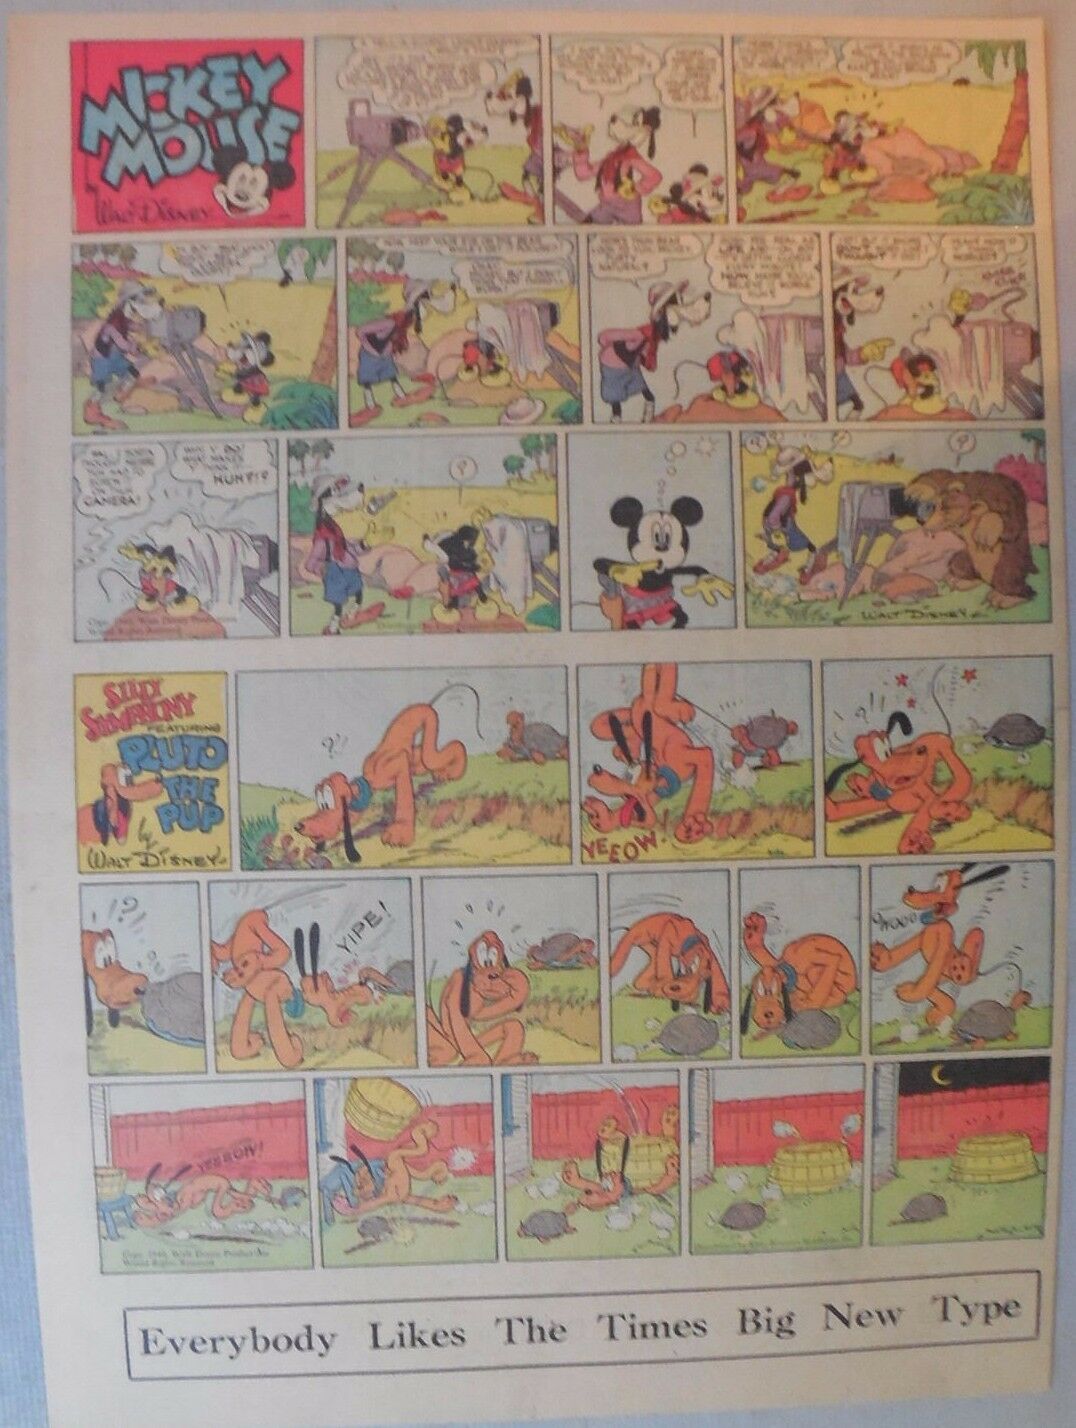 Details about   Mickey Mouse Sunday Page by Walt Disney from 4/21/1940 Tabloid Page Size 